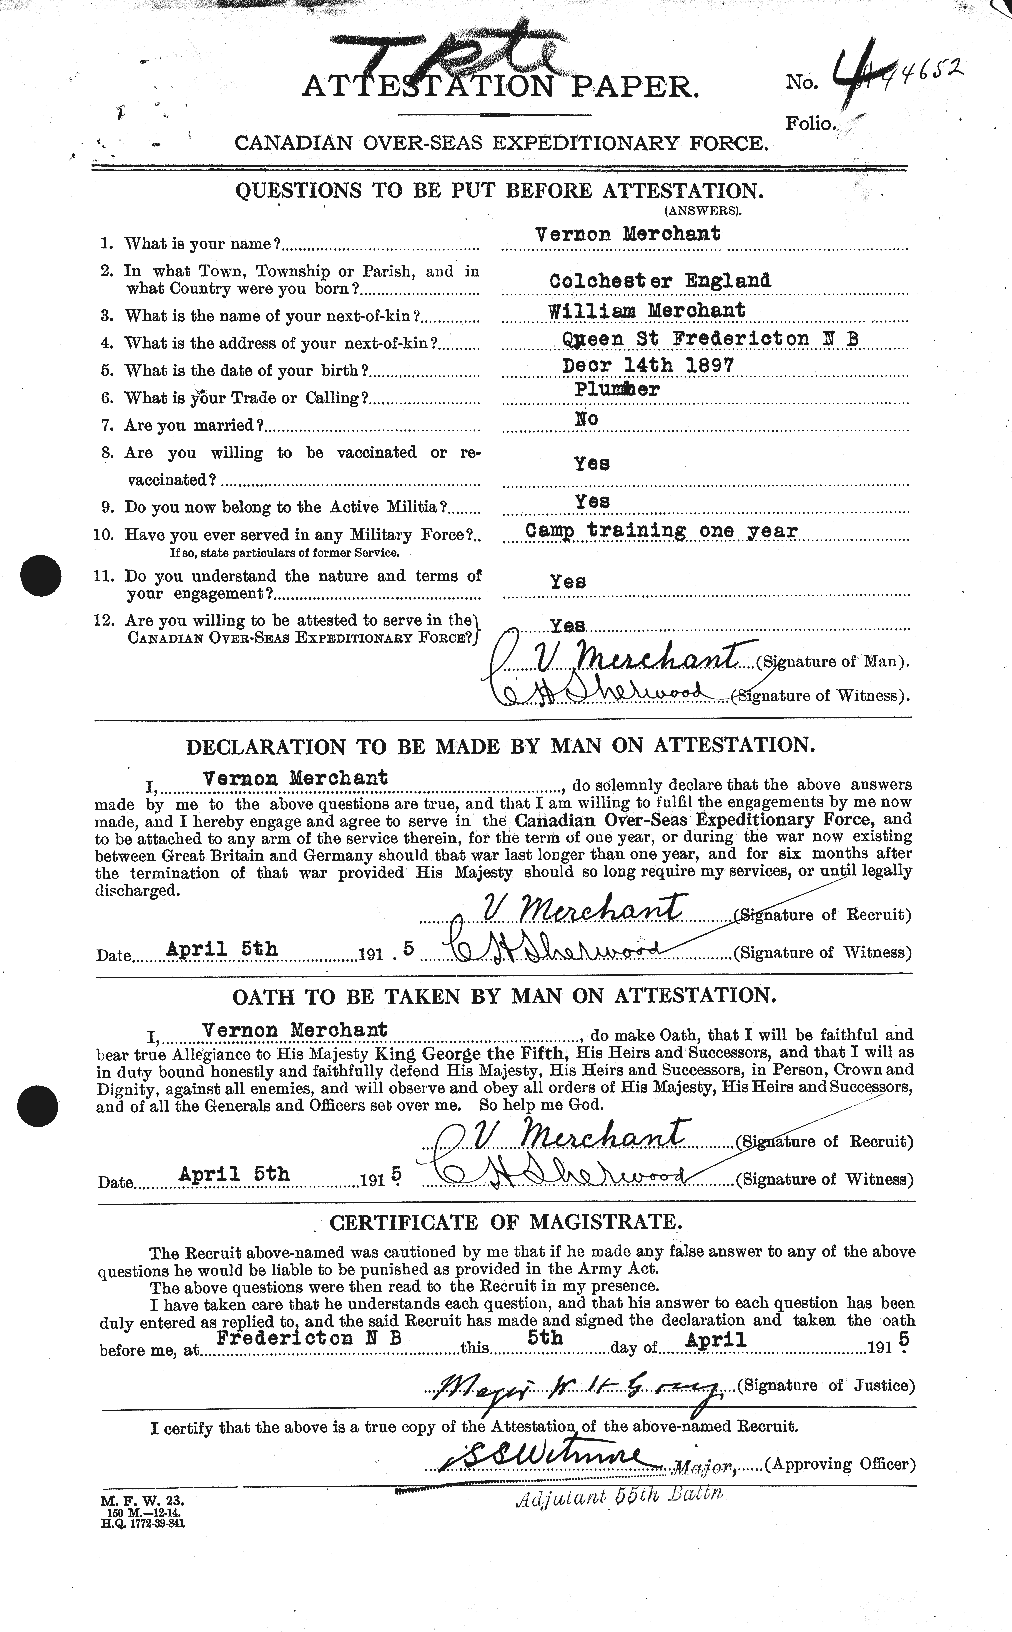 Personnel Records of the First World War - CEF 493432a